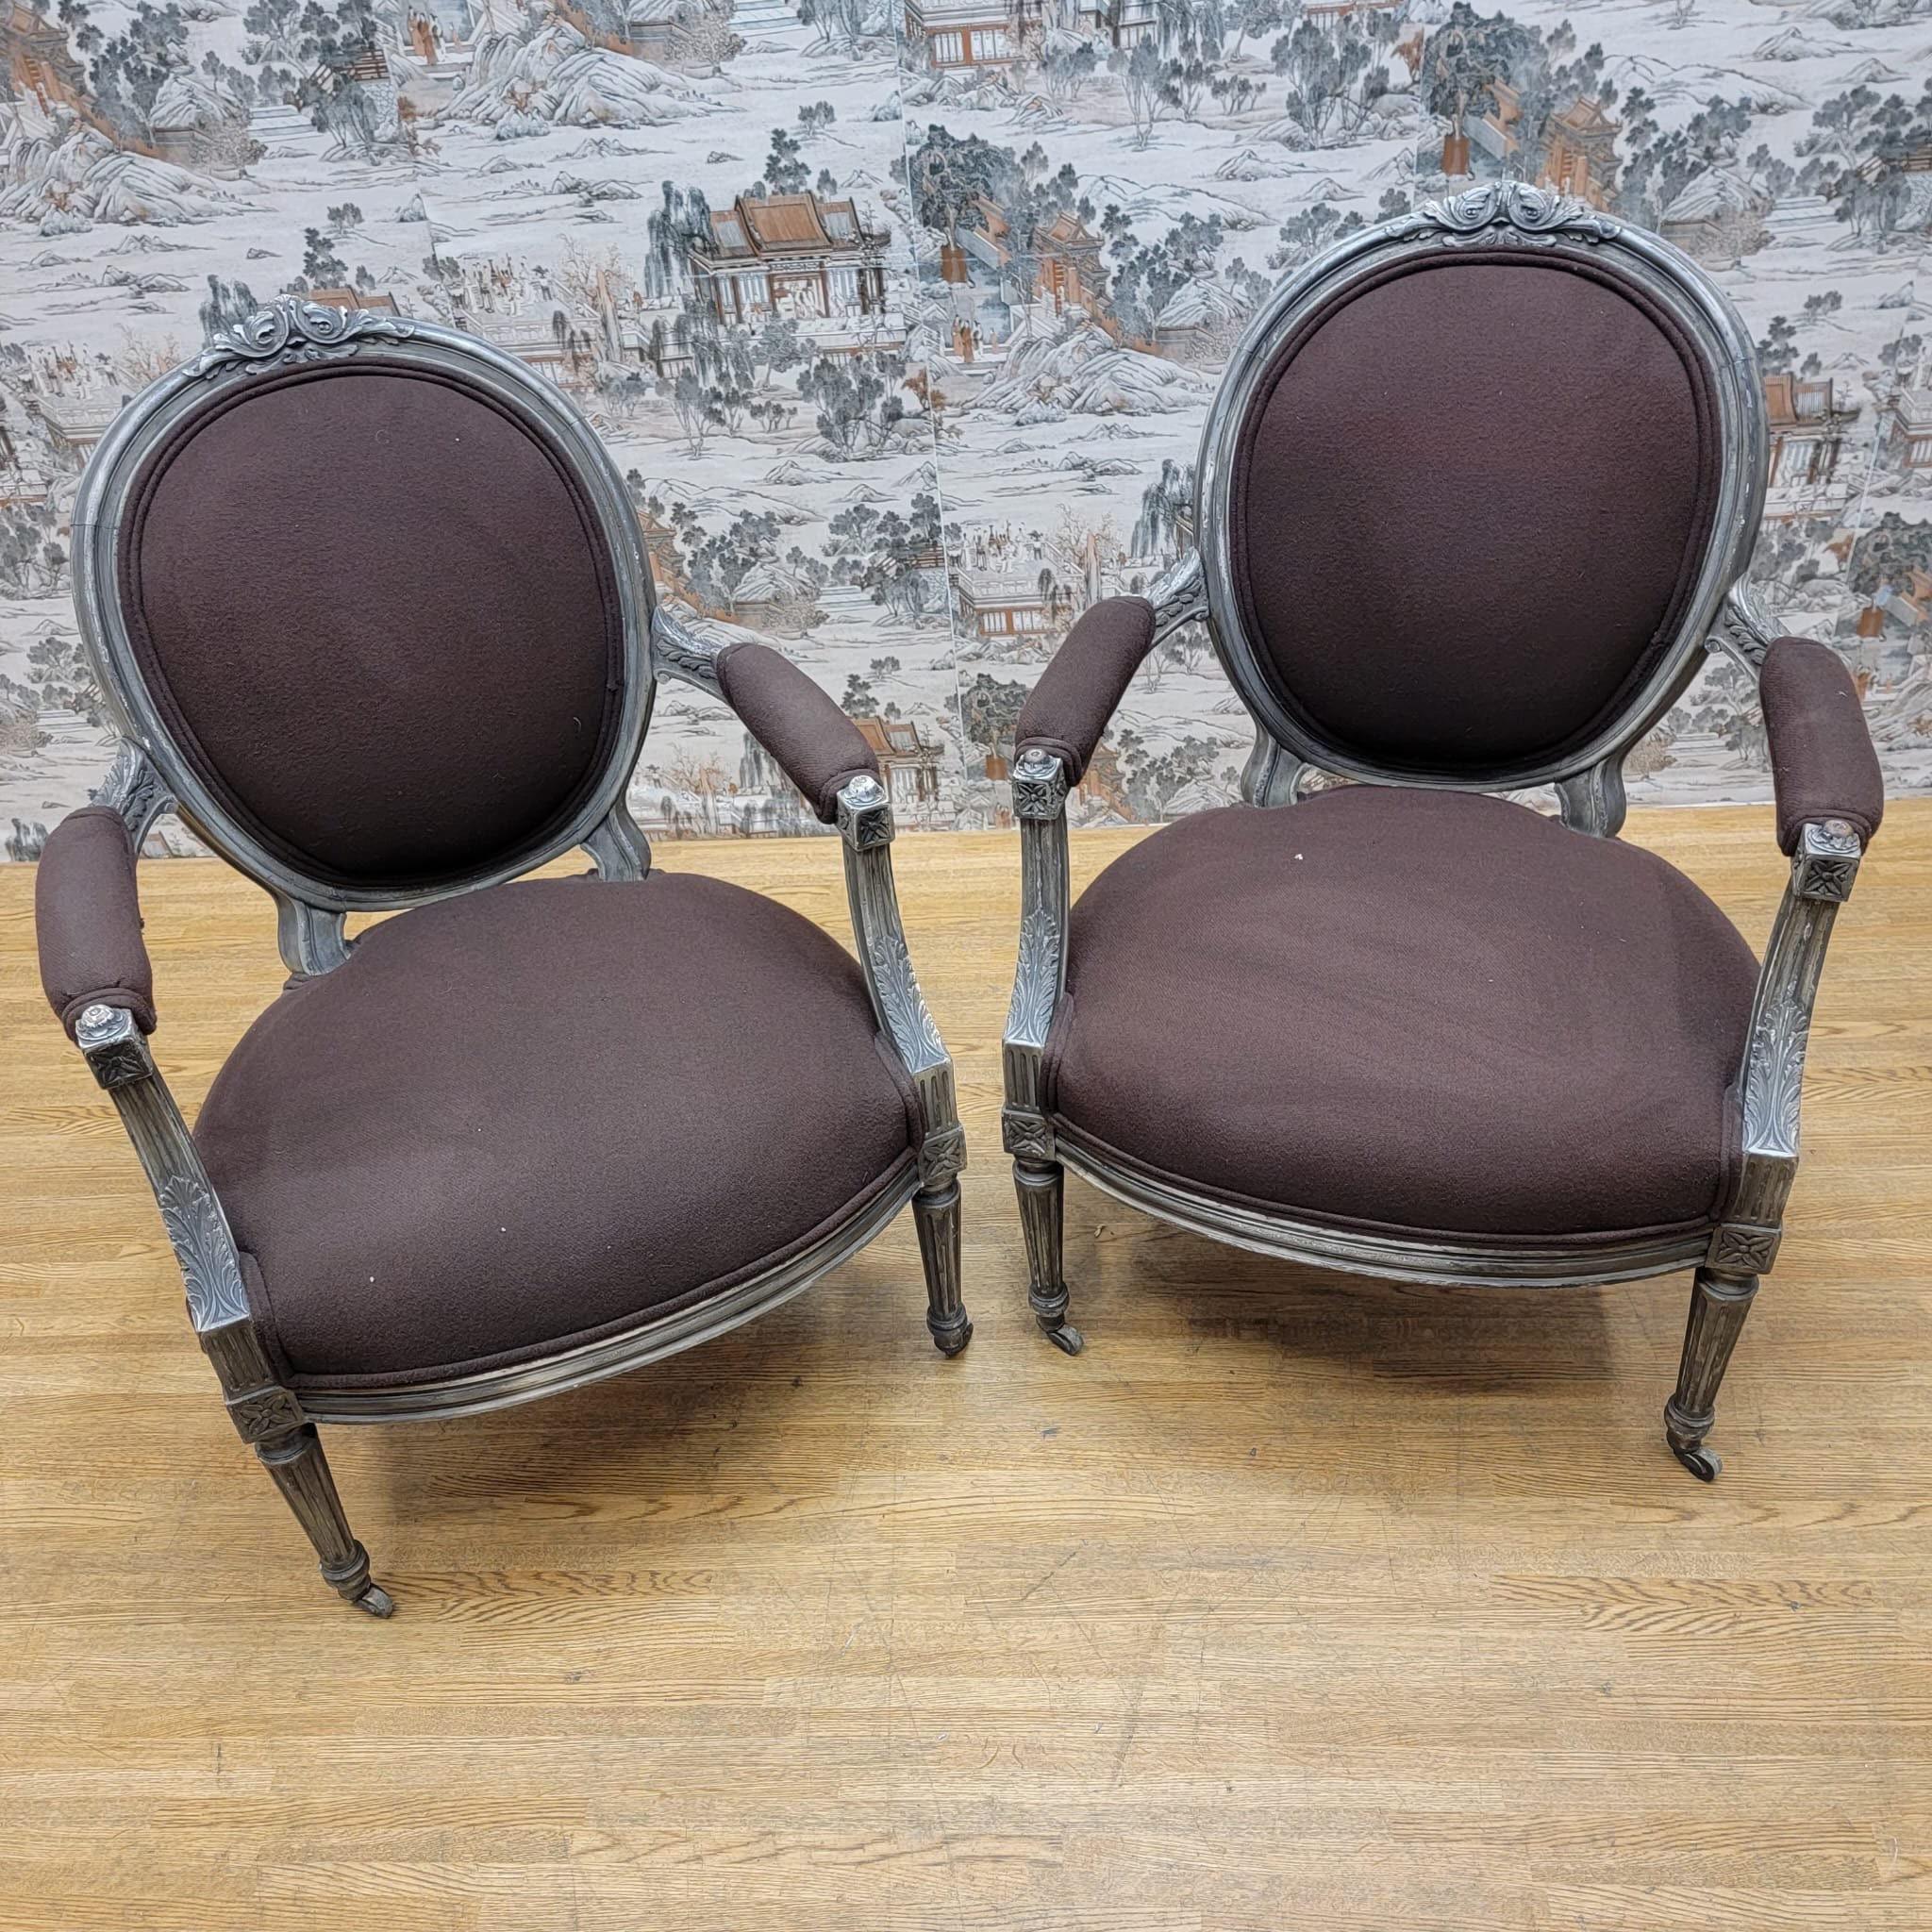 Antique French Louis XVI Hand Carved Silver Gilt Framed Fauteuil Armchairs-Pair For Sale 2